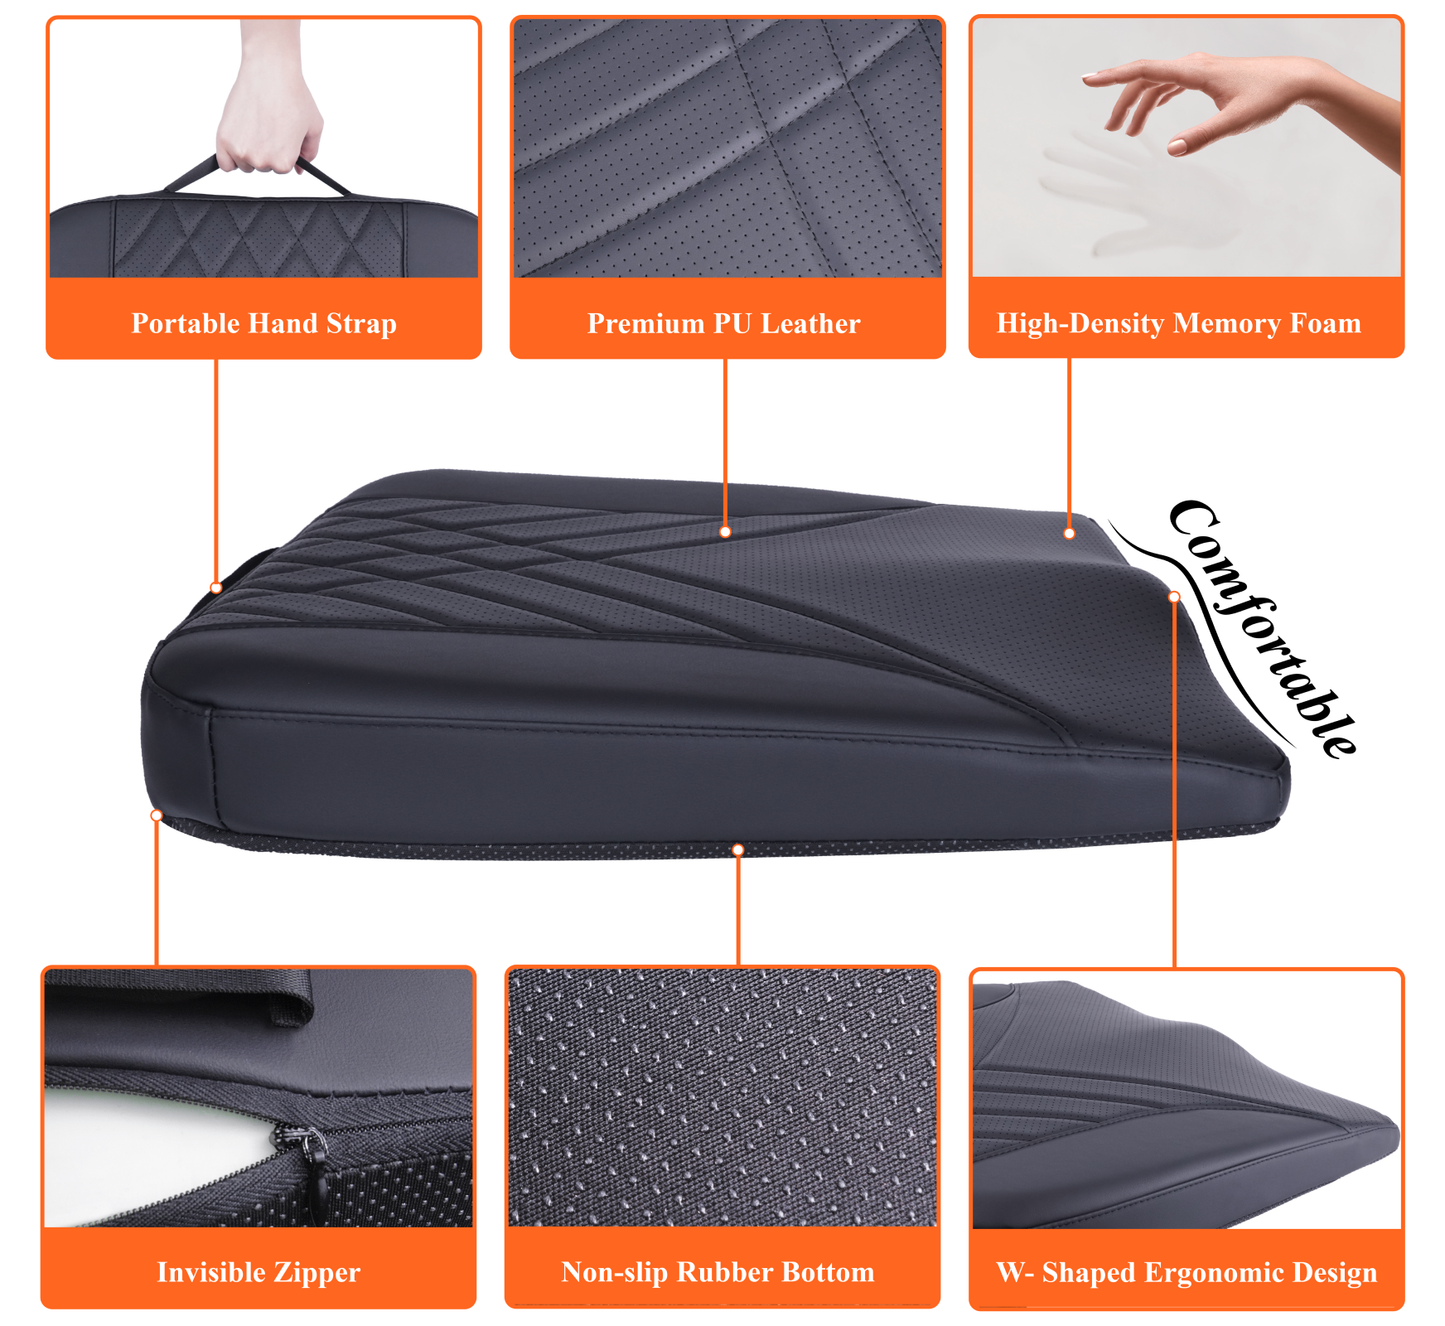 kingphenix Premium Car Seat Cushion, Memory Foam Driver Seat Cushion to Improve Driving View- Coccyx & Lower Back Pain Relief - Seat Cushion for Car, Truck, Office Chair